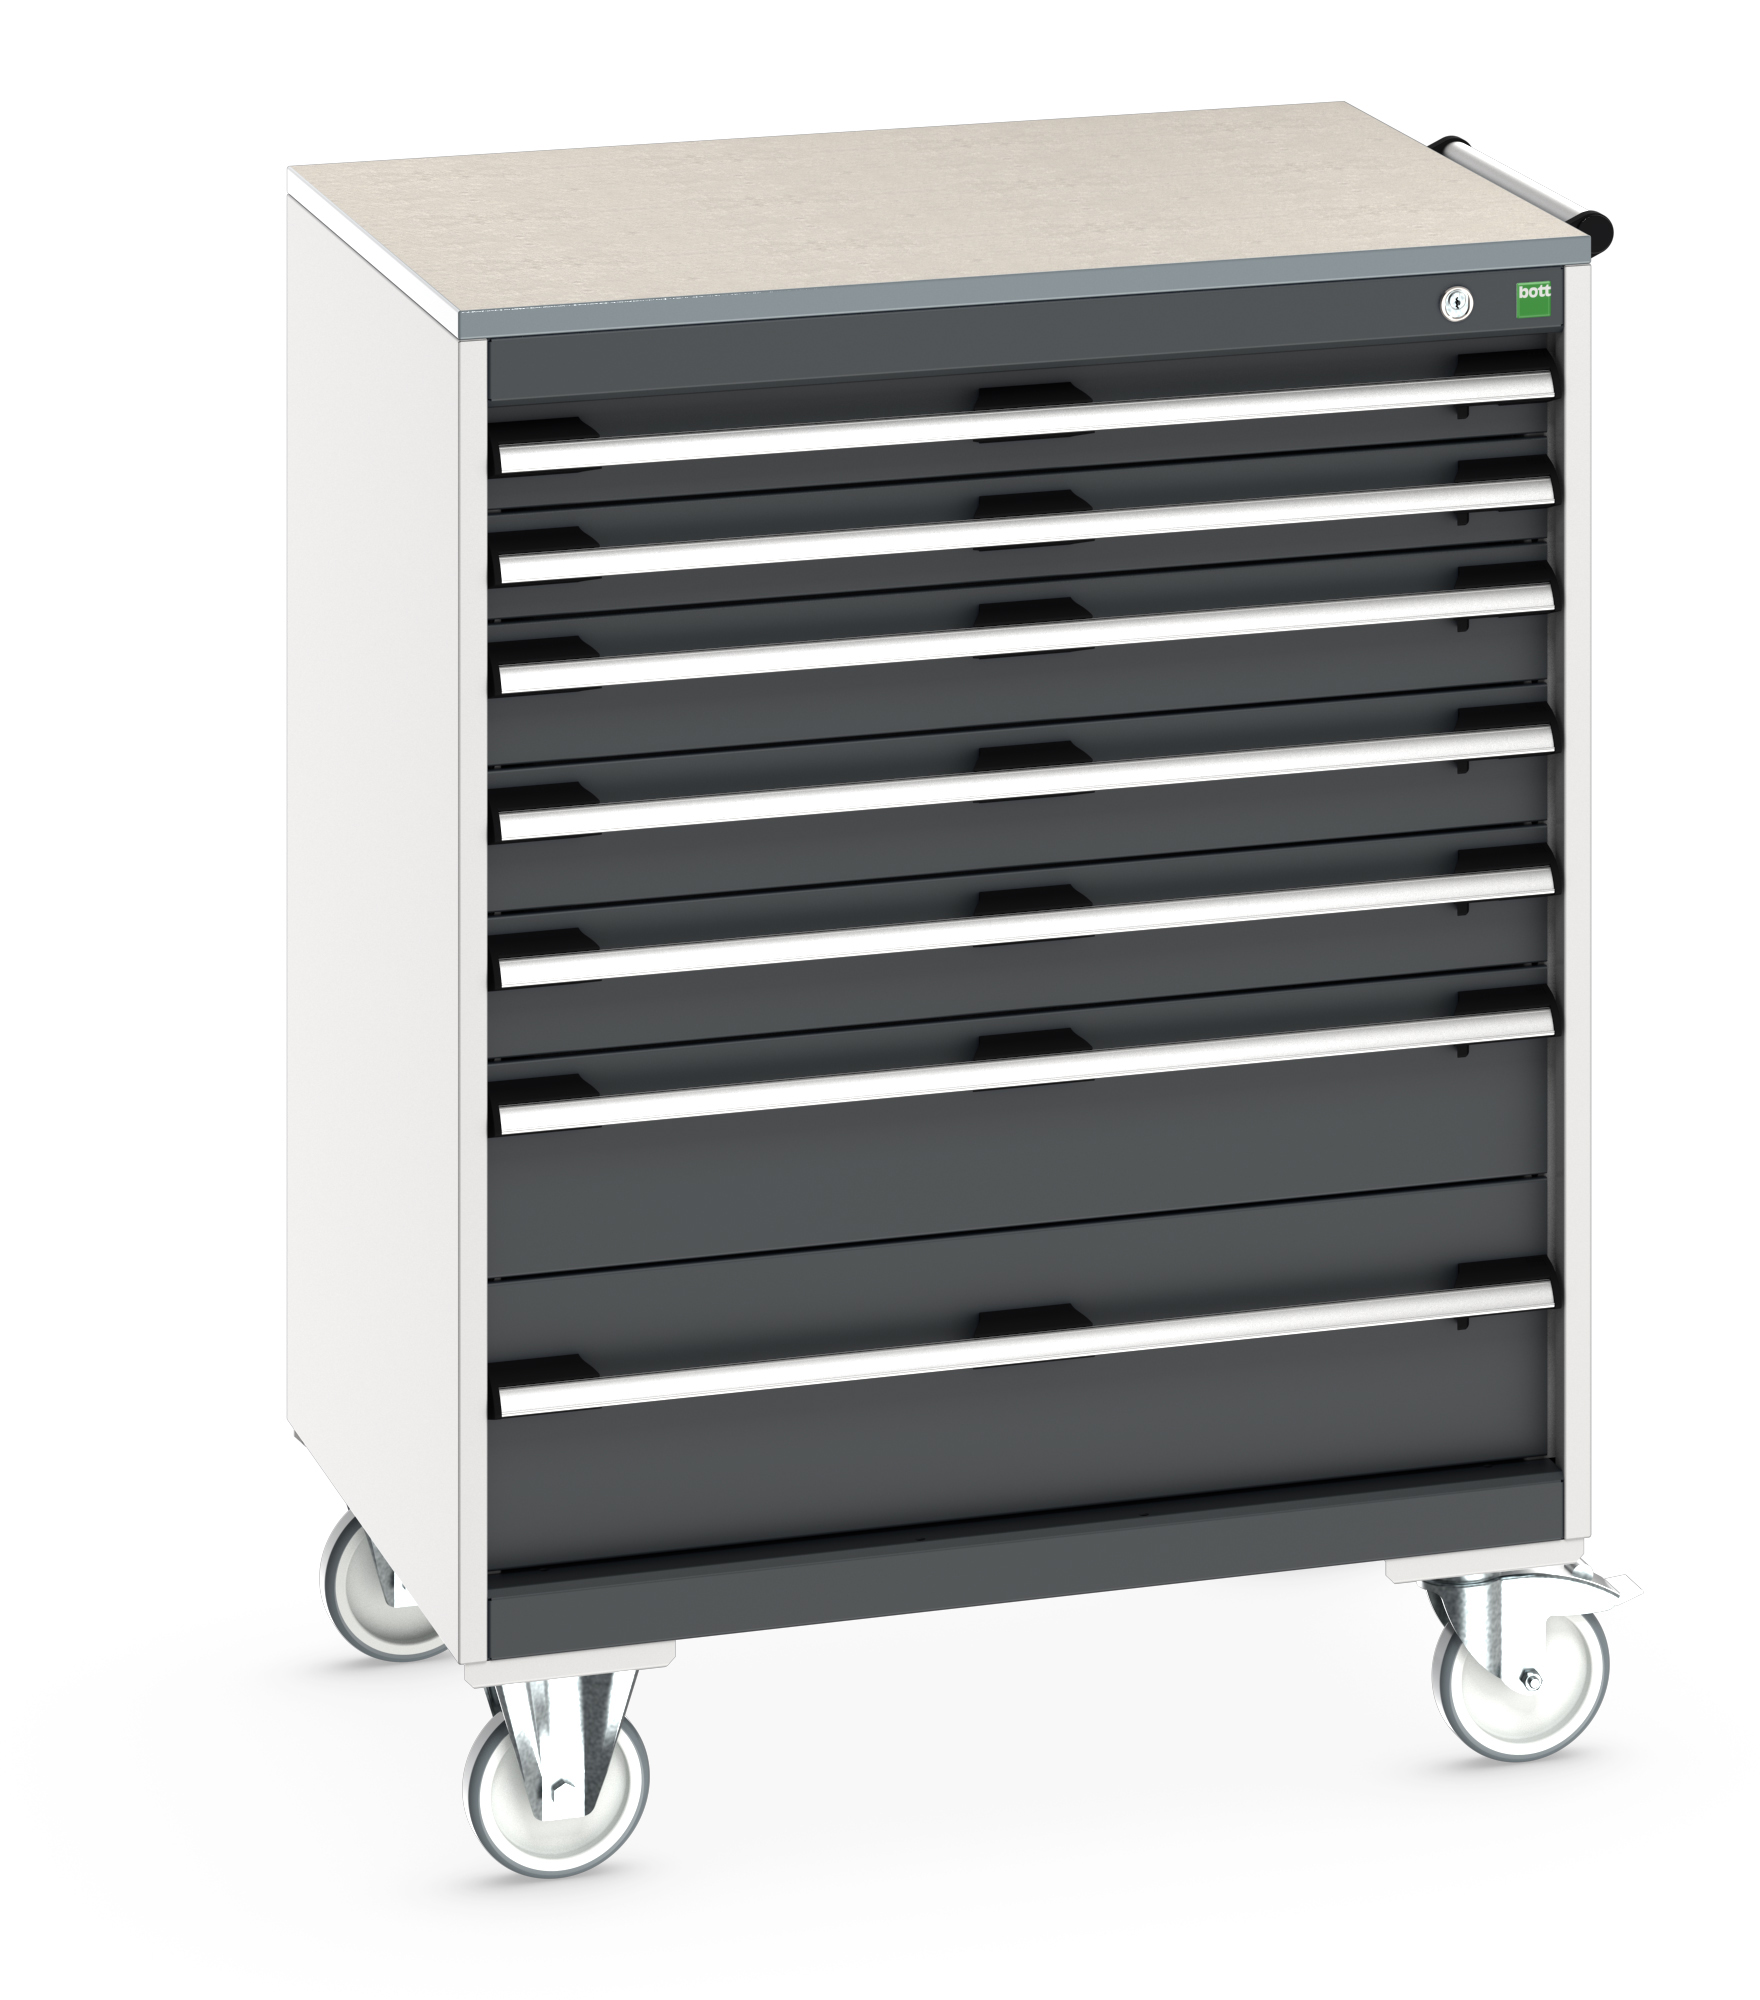 Bott Cubio Mobile Drawer Cabinet With 7 Drawers & Lino Worktop - 40402162.19V